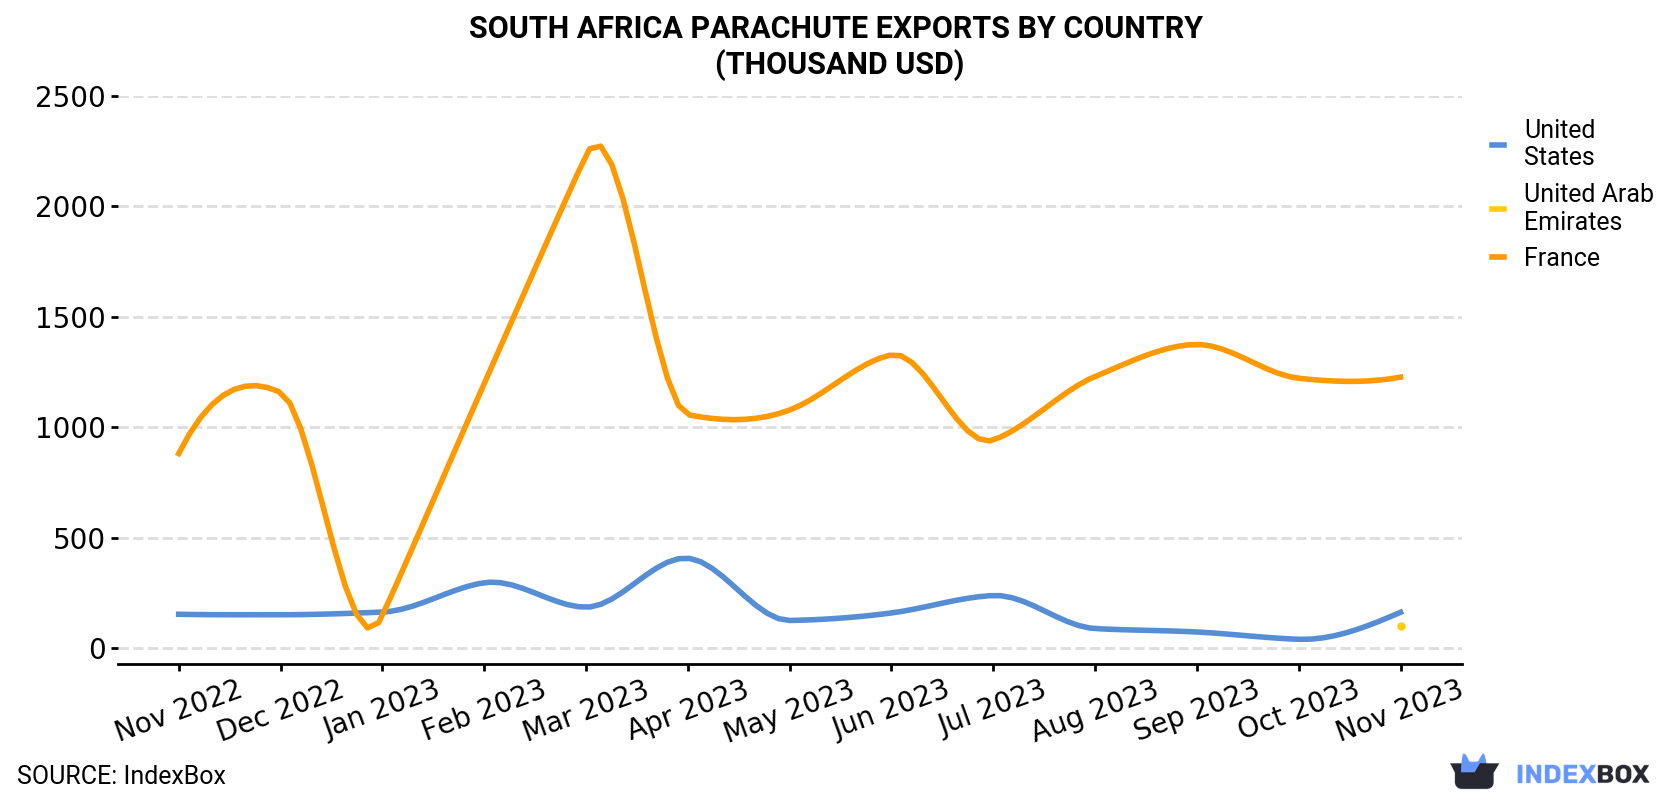 South Africa Parachute Exports By Country (Thousand USD)